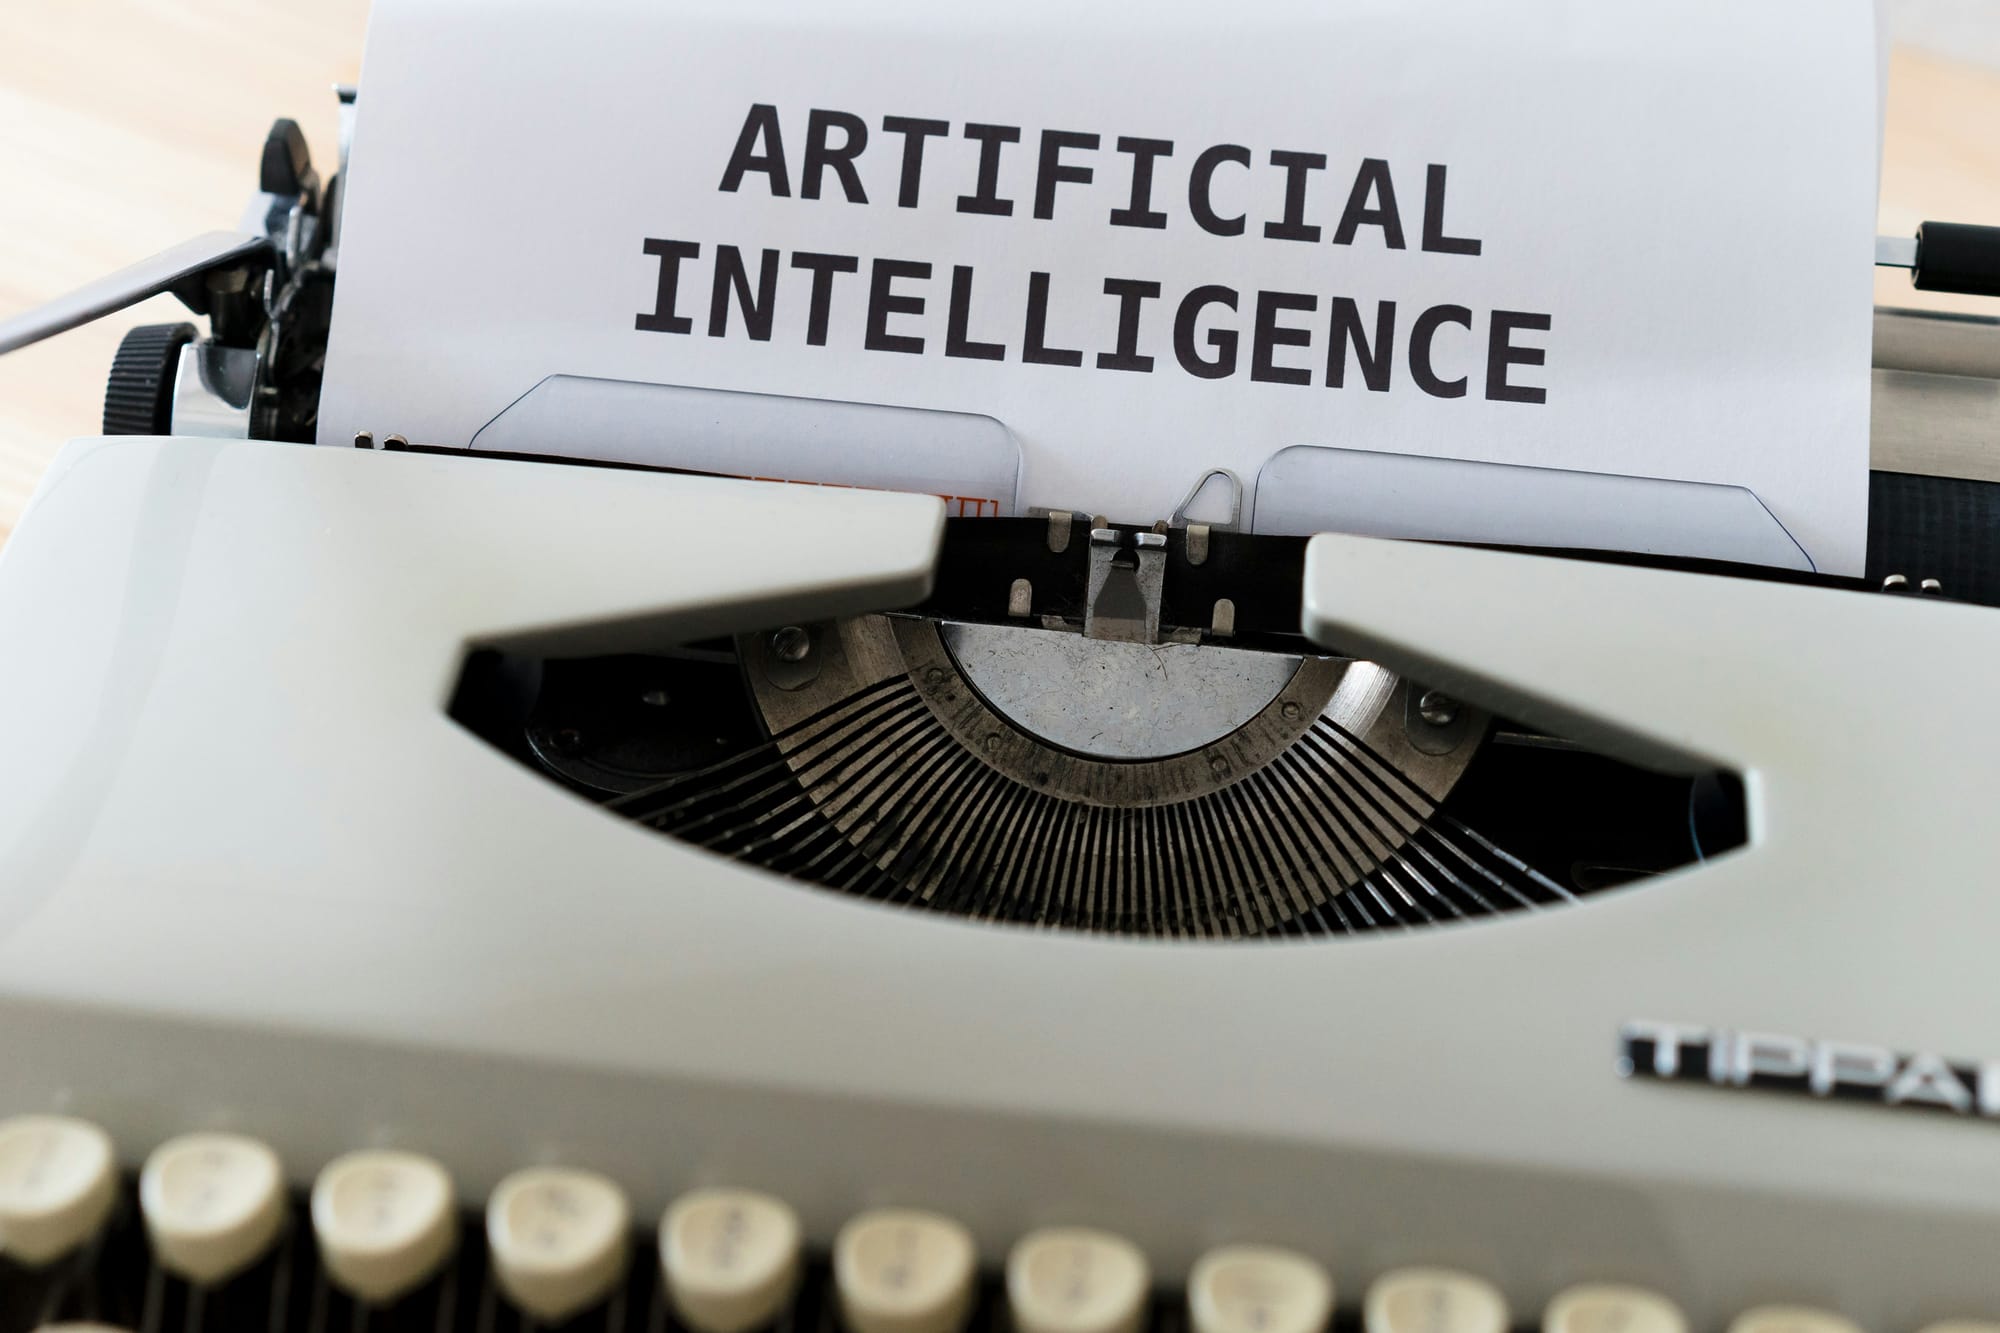 Artificial Intelligence printing - Content Automation